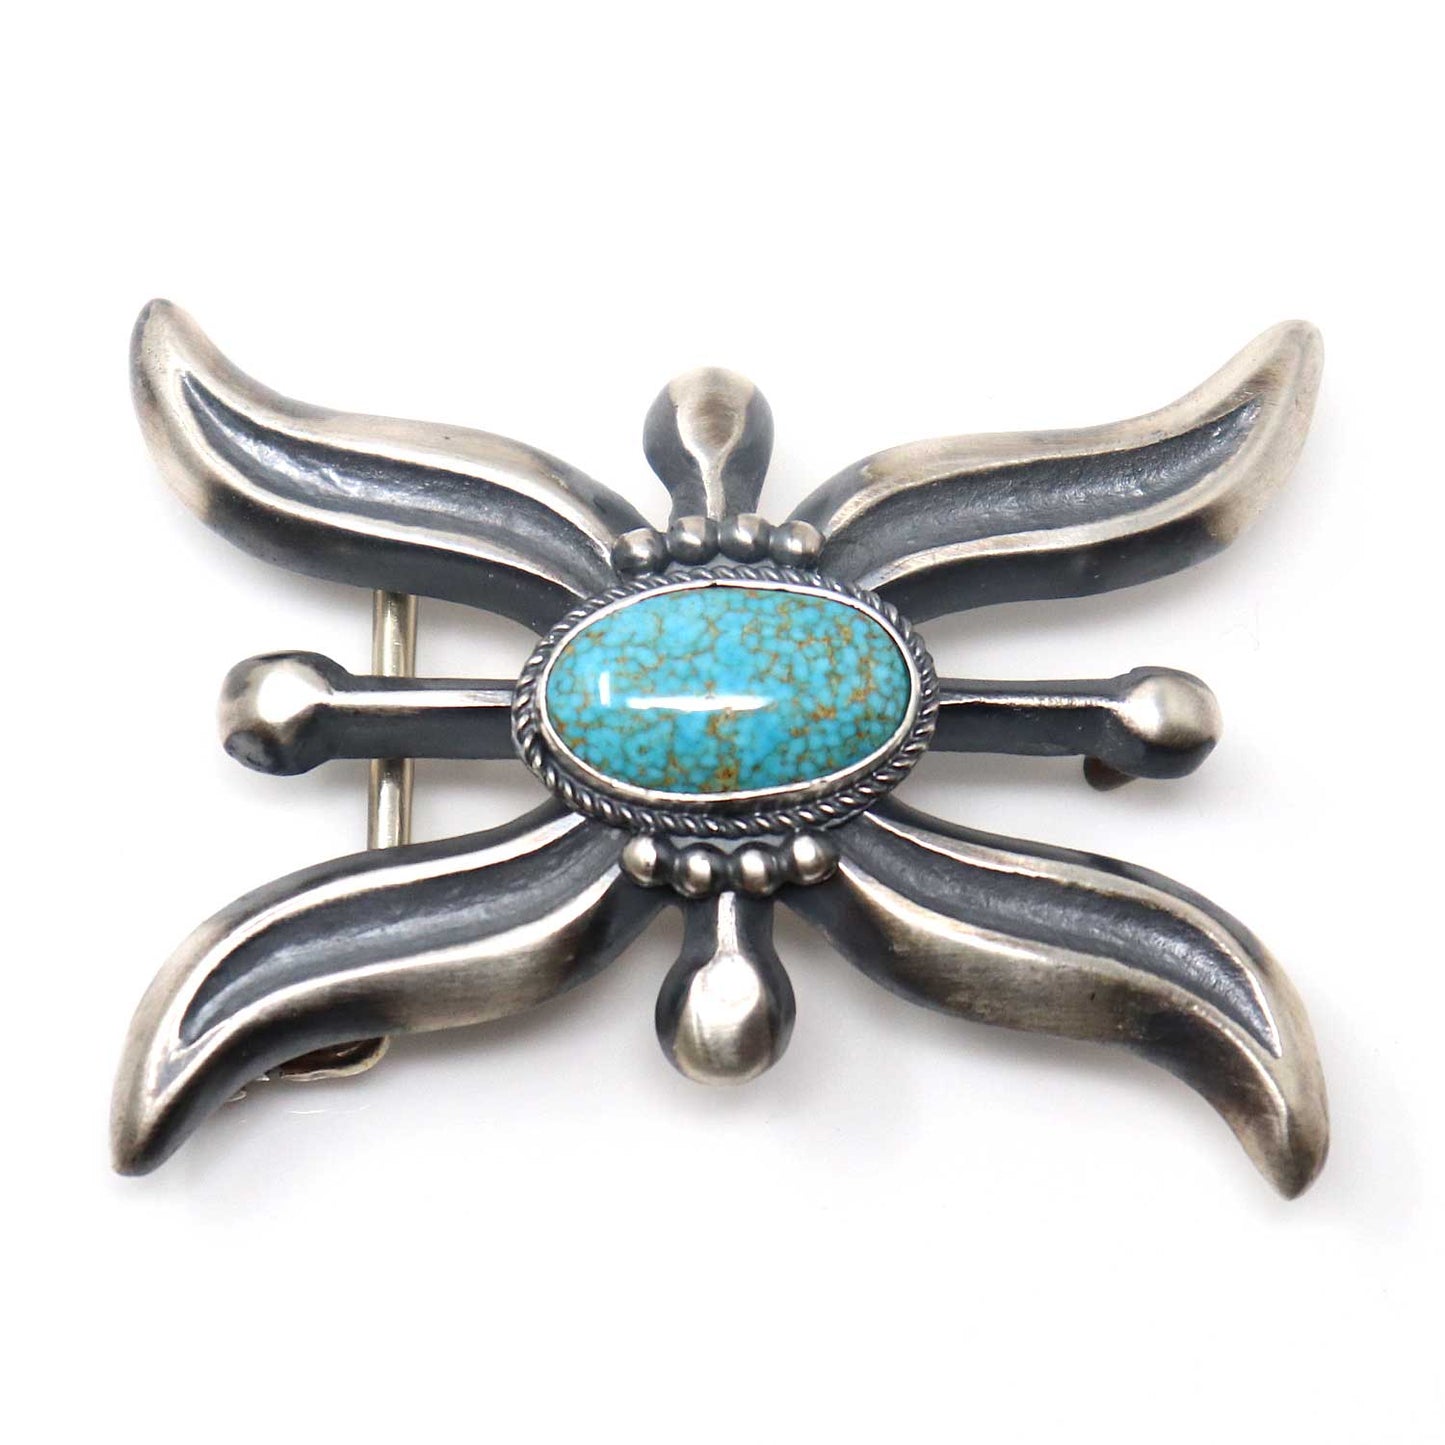 Turquoise & Silver Cast Buckle by Harrison Bitsui